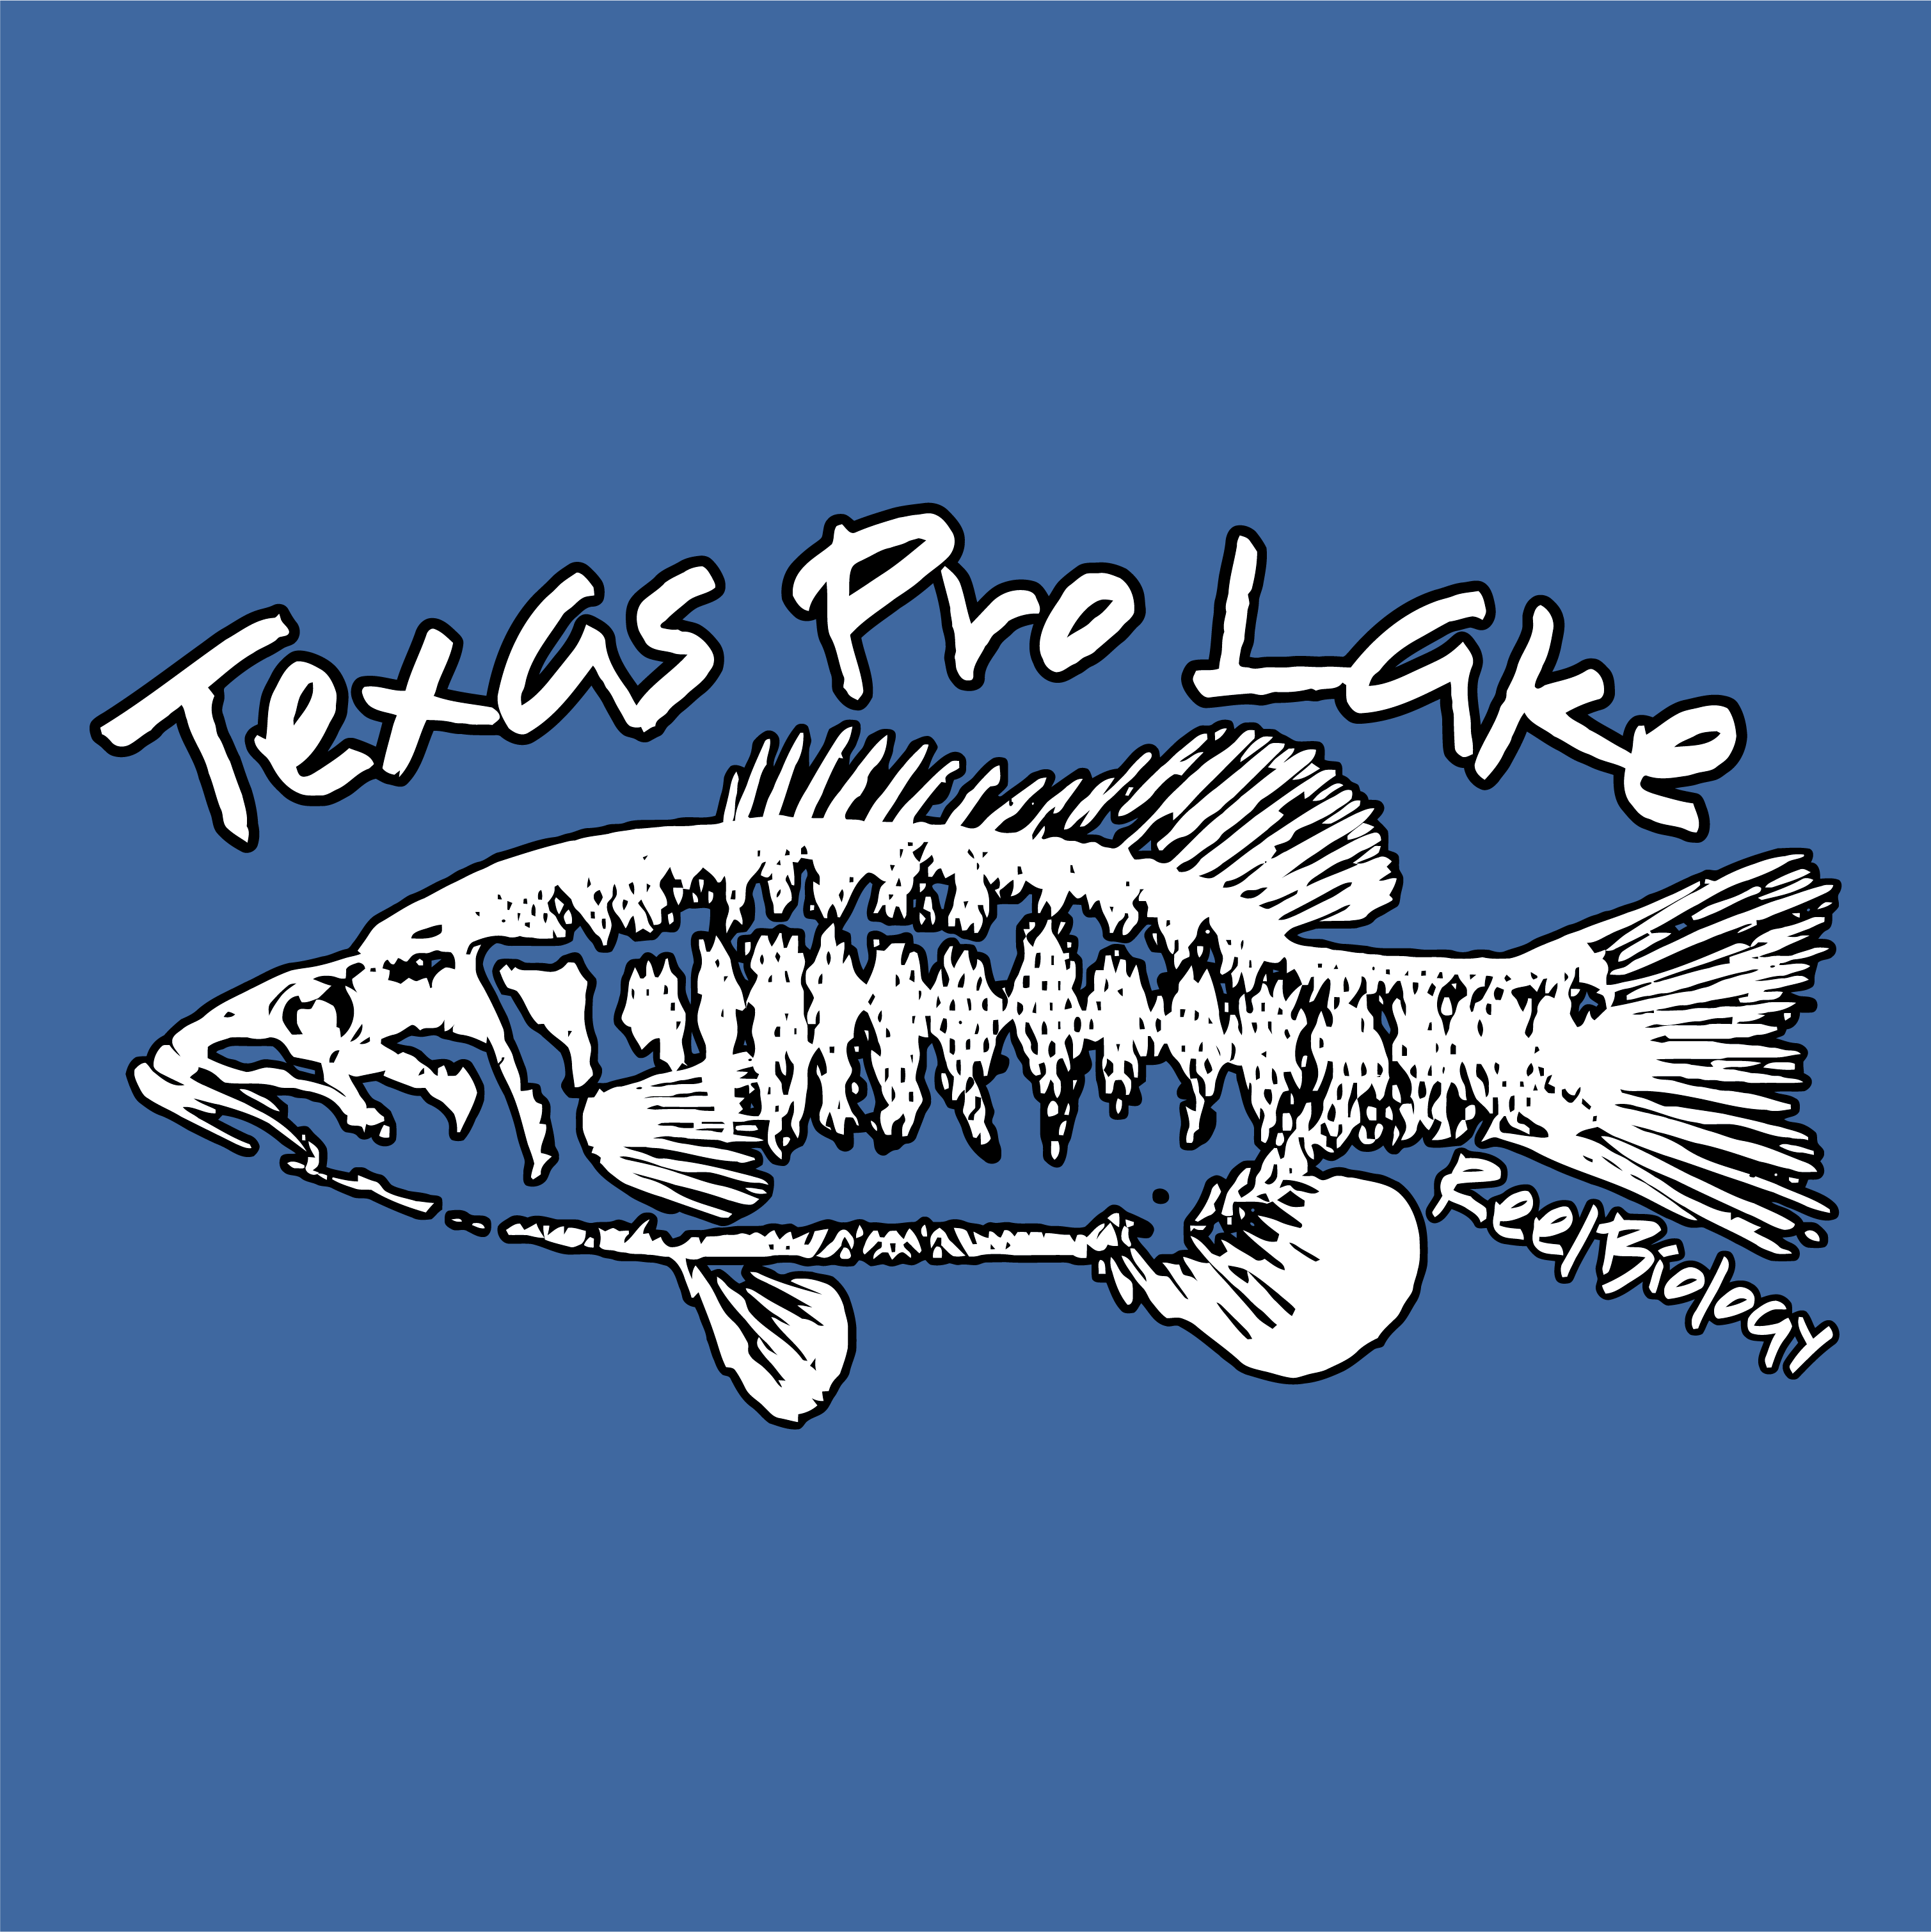 Texas Pro Lake Management Annual Fundraiser - #REELBIOLOGY shirt design - zoomed